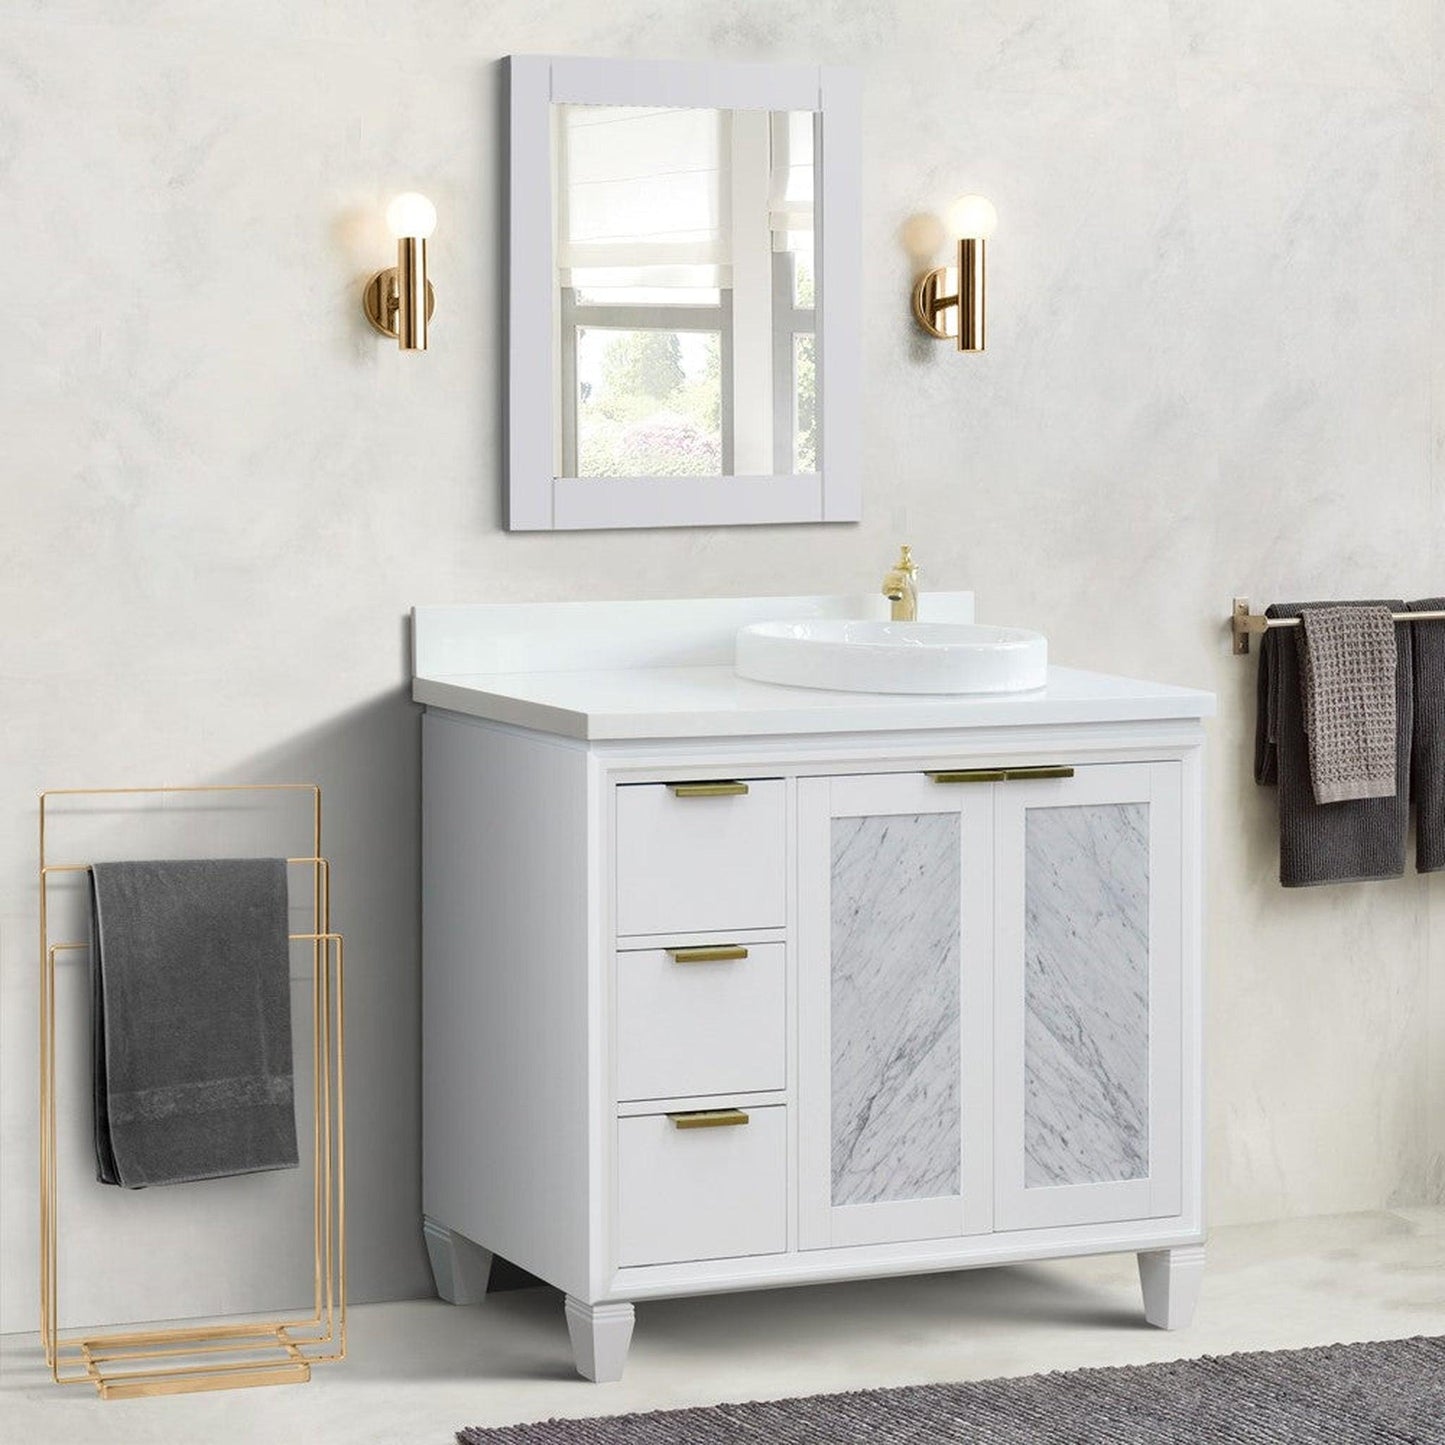 Bellaterra Home Trento 43" 2-Door 3-Drawer White Freestanding Vanity Set With Ceramic Right Vessel Sink and White Quartz Top, and Right Door Cabinet